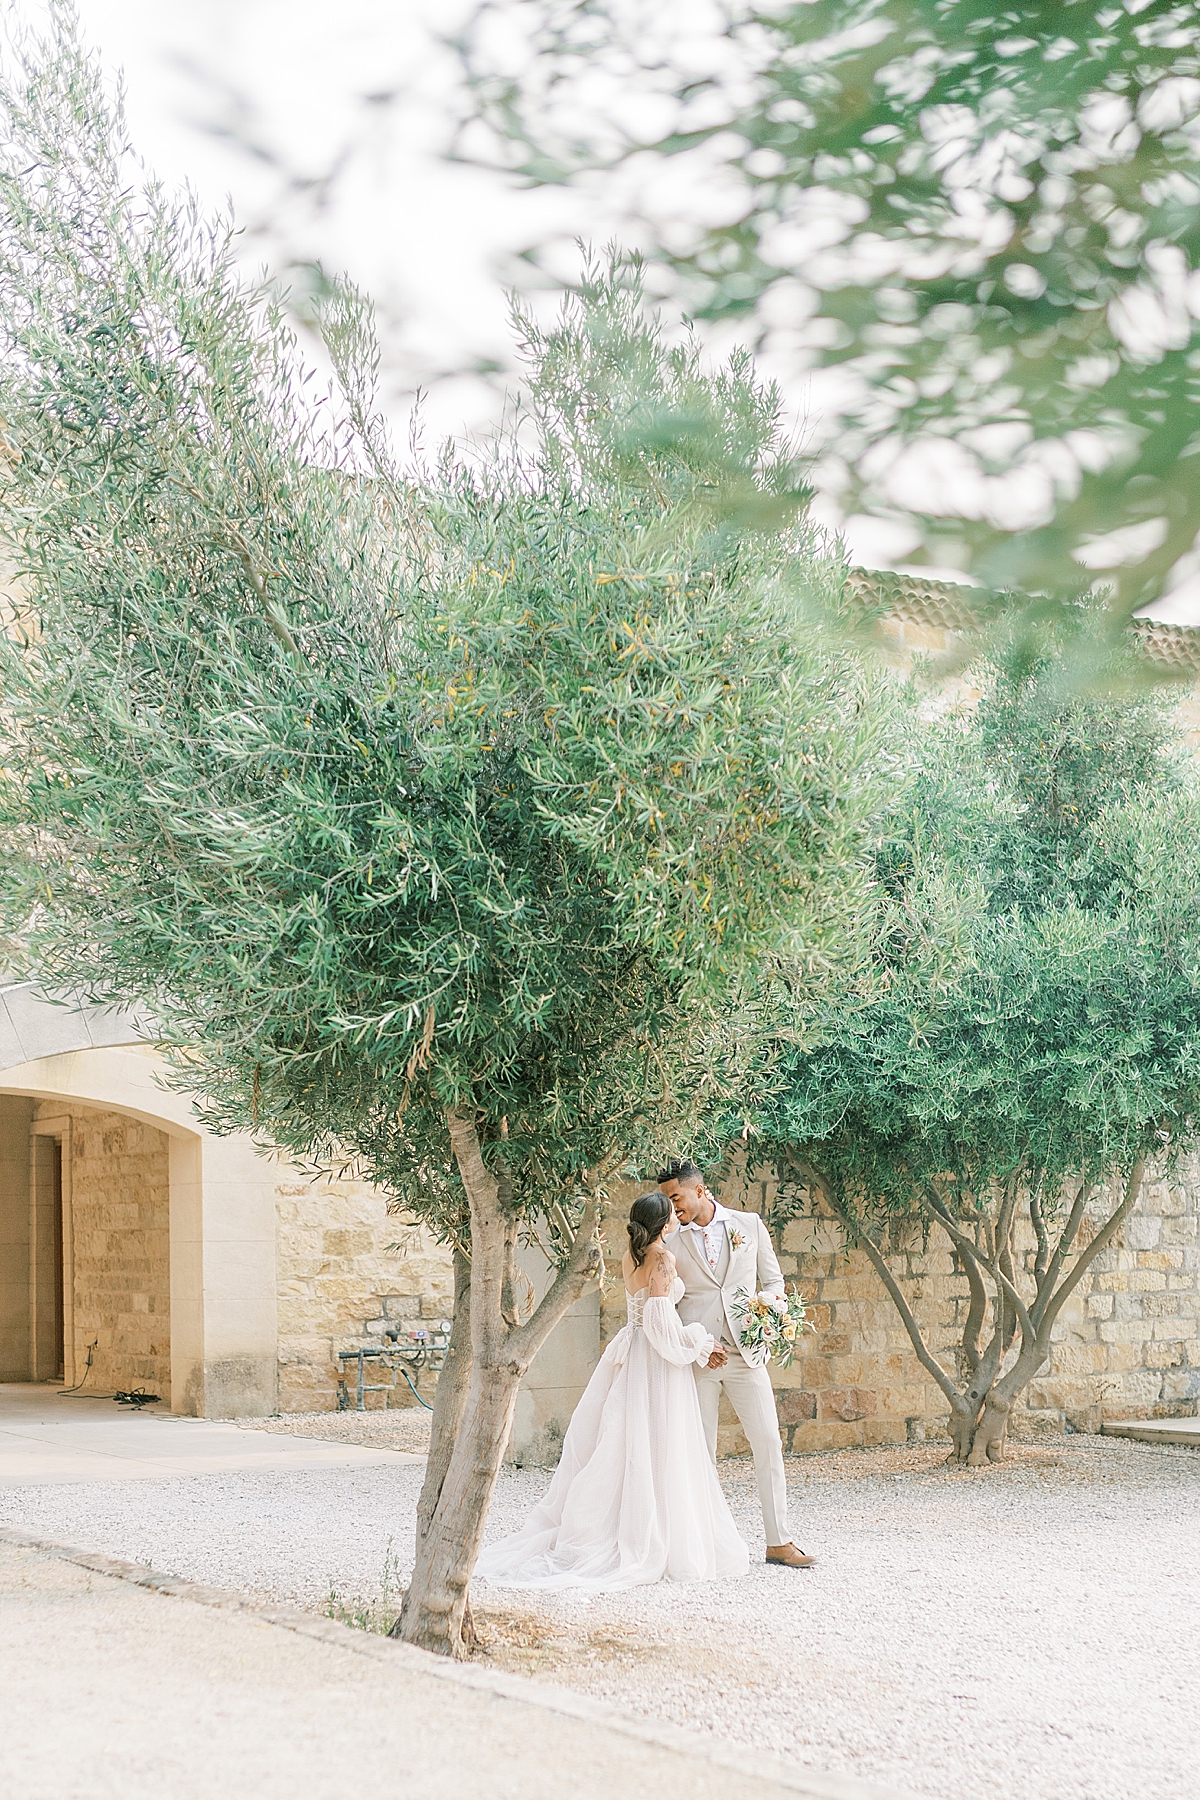 Miya & Luke sharing a kiss as he holds her bouquet under two olive trees.